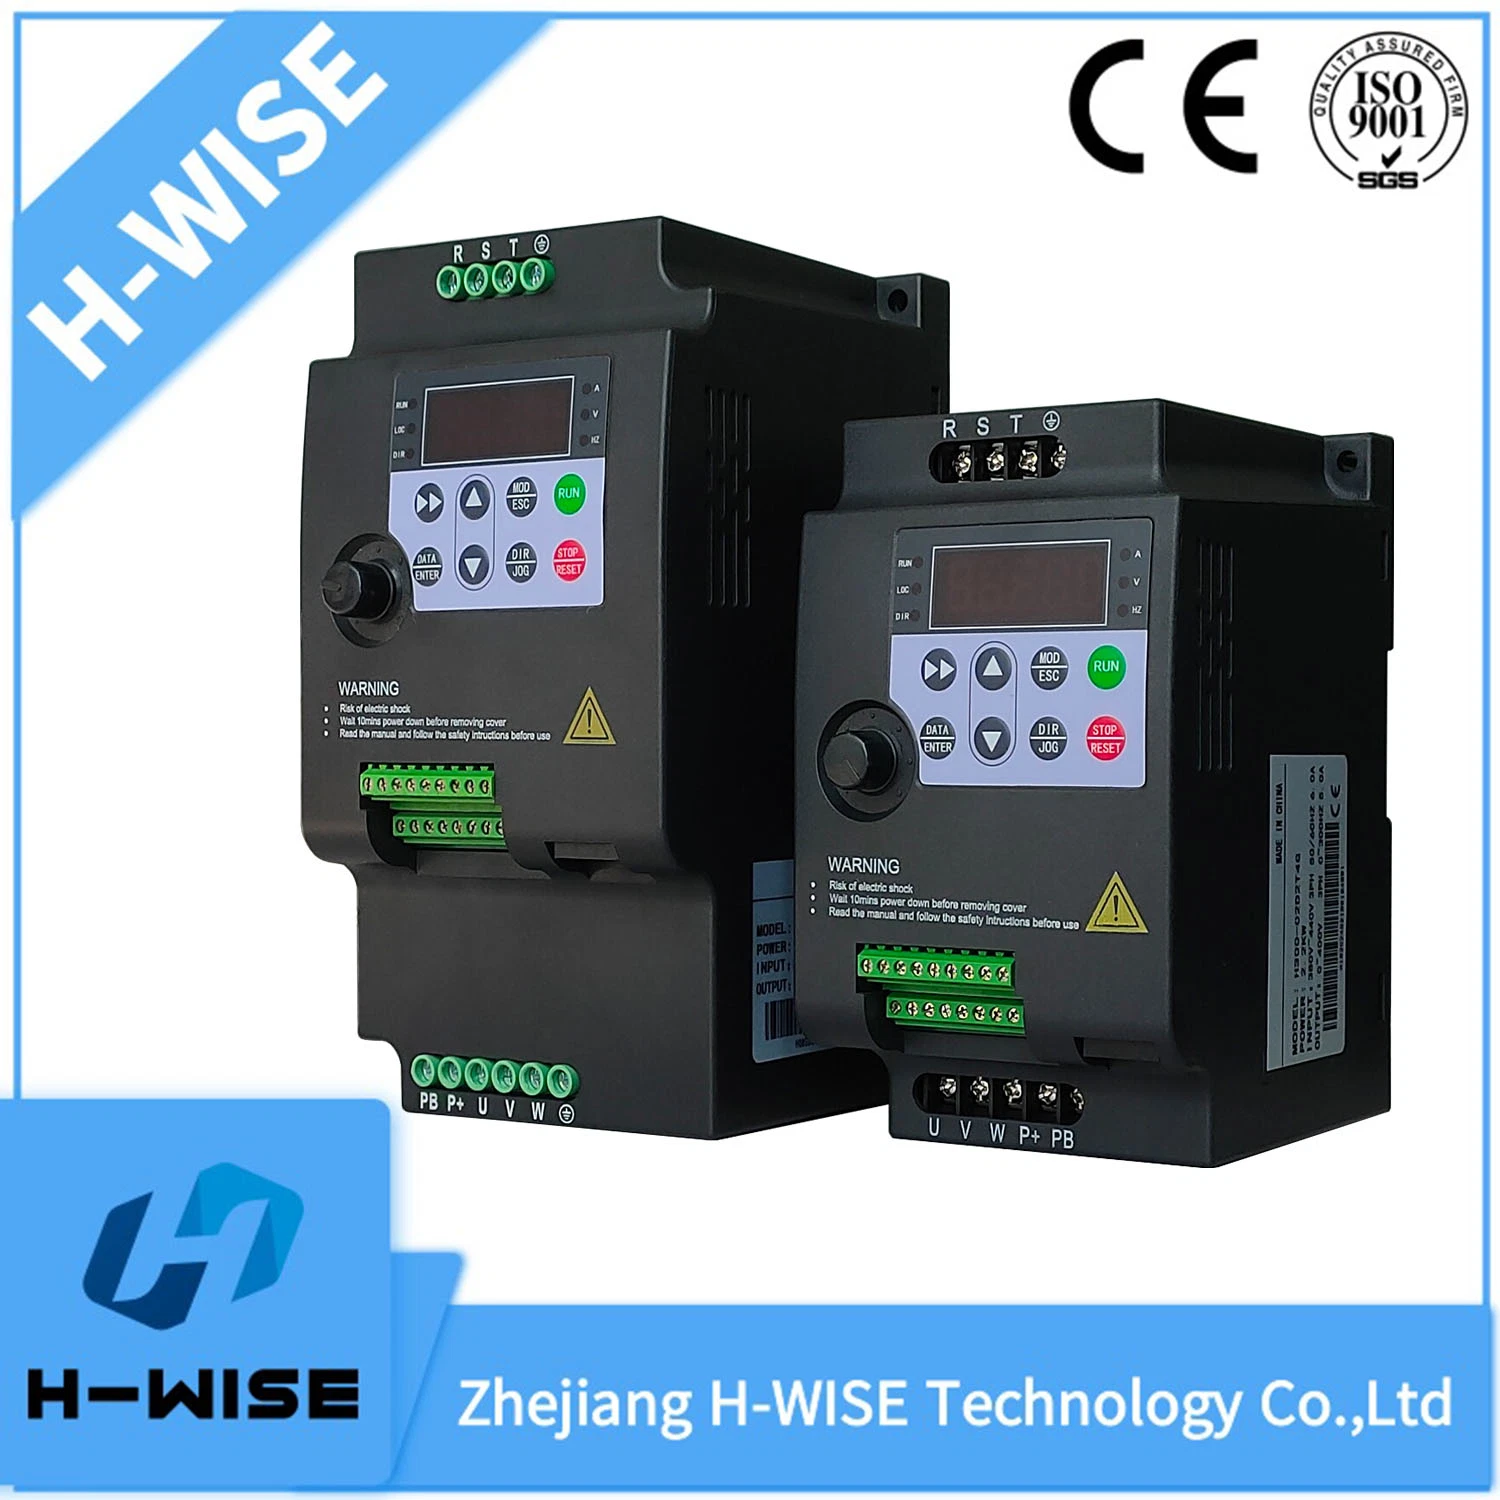 Micro Economical Variable Frequency Drive Power 2.2kw 3HP, 220V Single Phase Frequency Drive Inverter/AC Drive/Speed Controller Converter/VFD